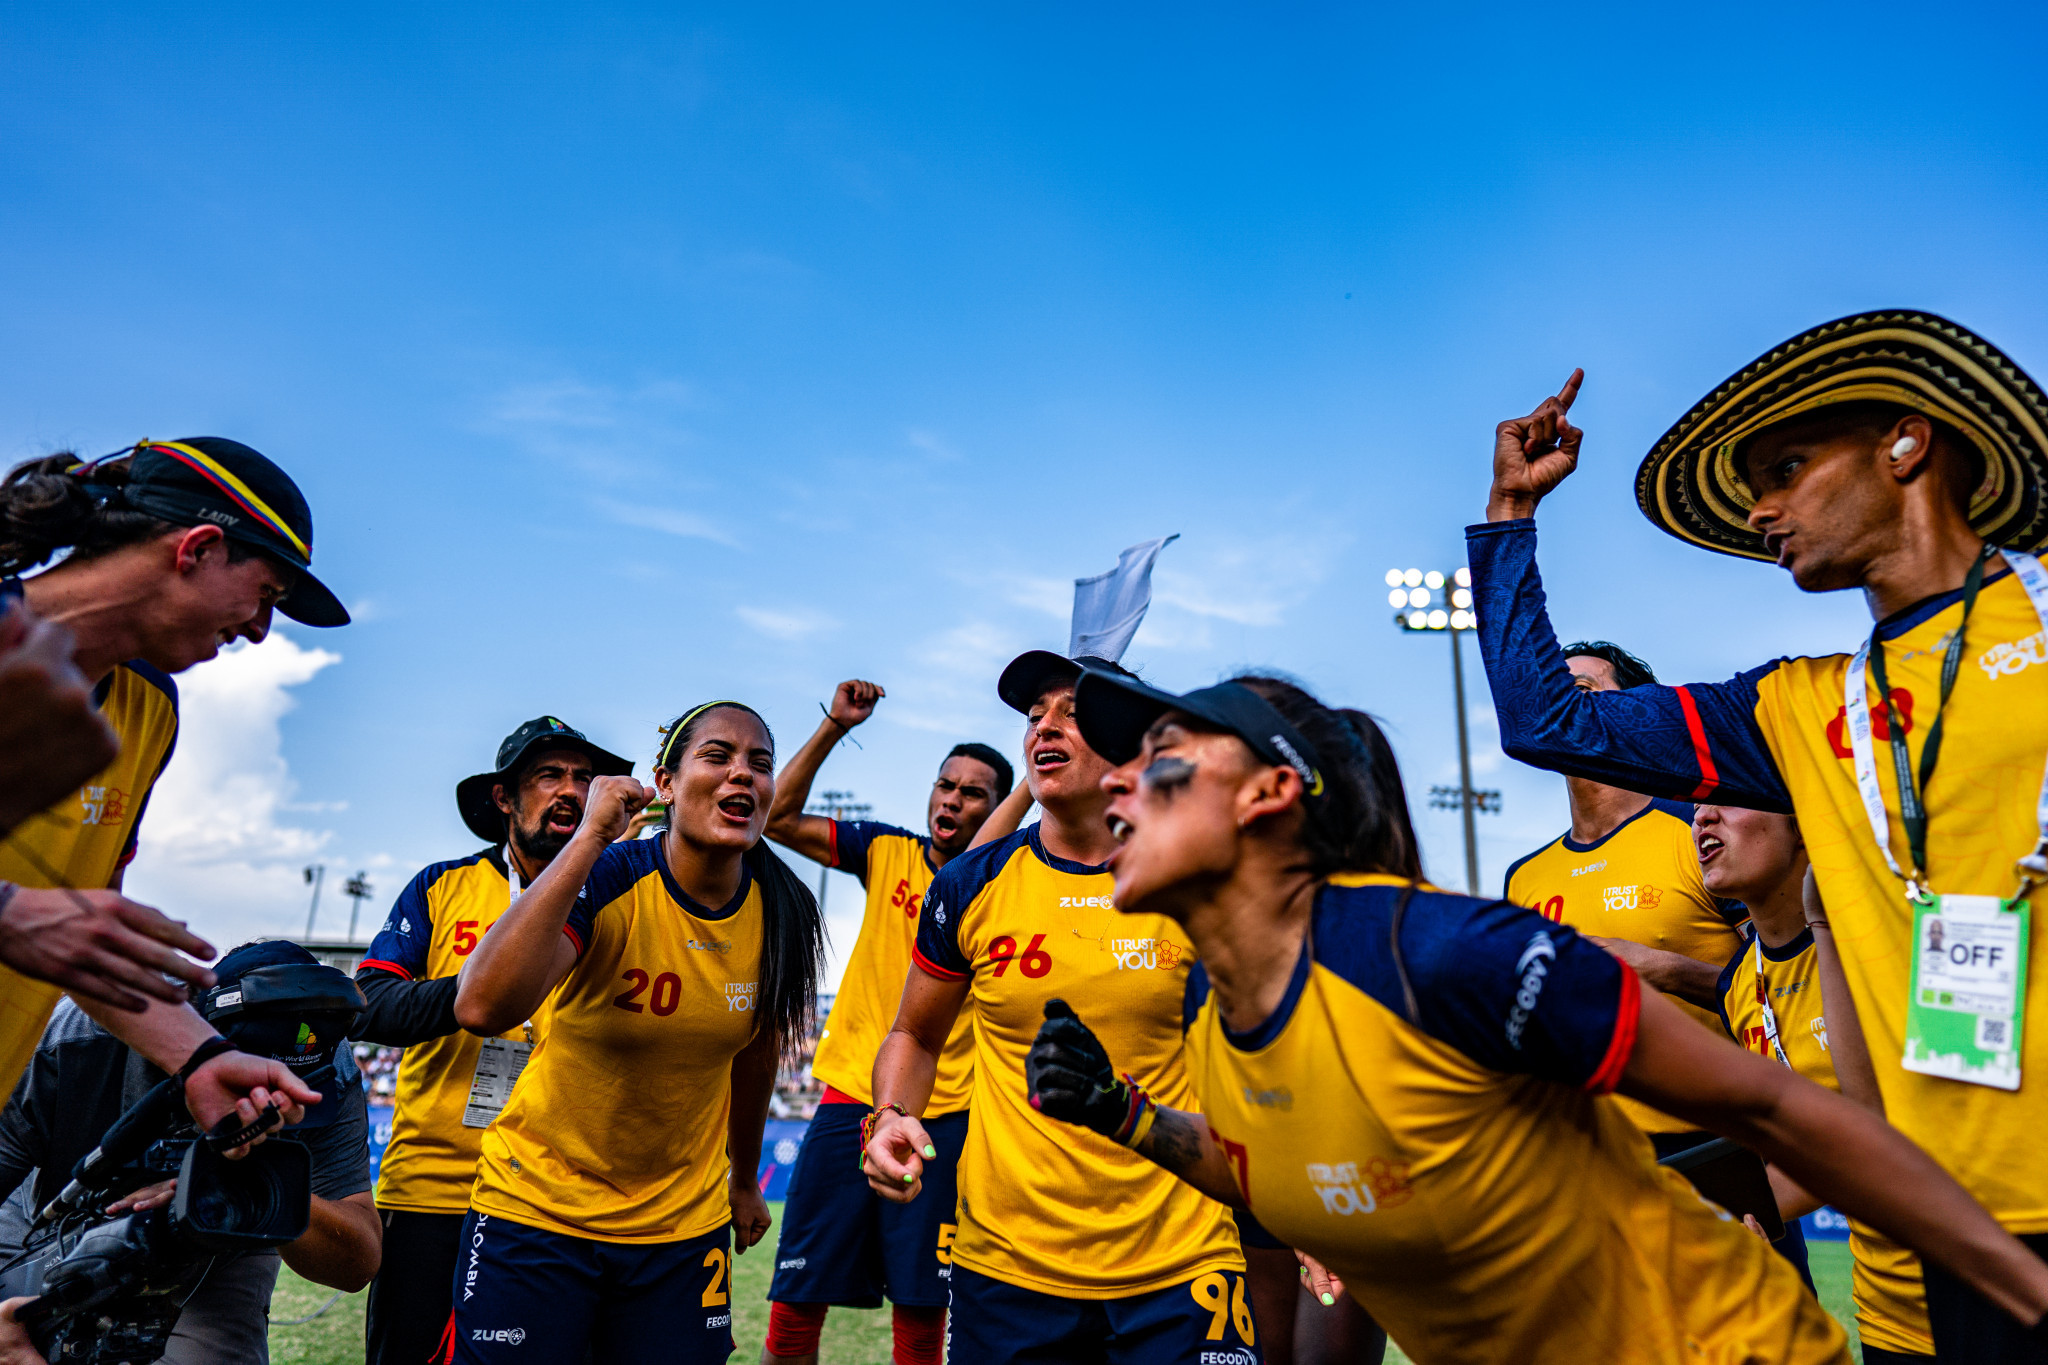 Colombia celebrate winning bronze in the flying disc ultimate mixed event ©The World Games 2022/Parker S. Freedman/Dustin Massey Studios